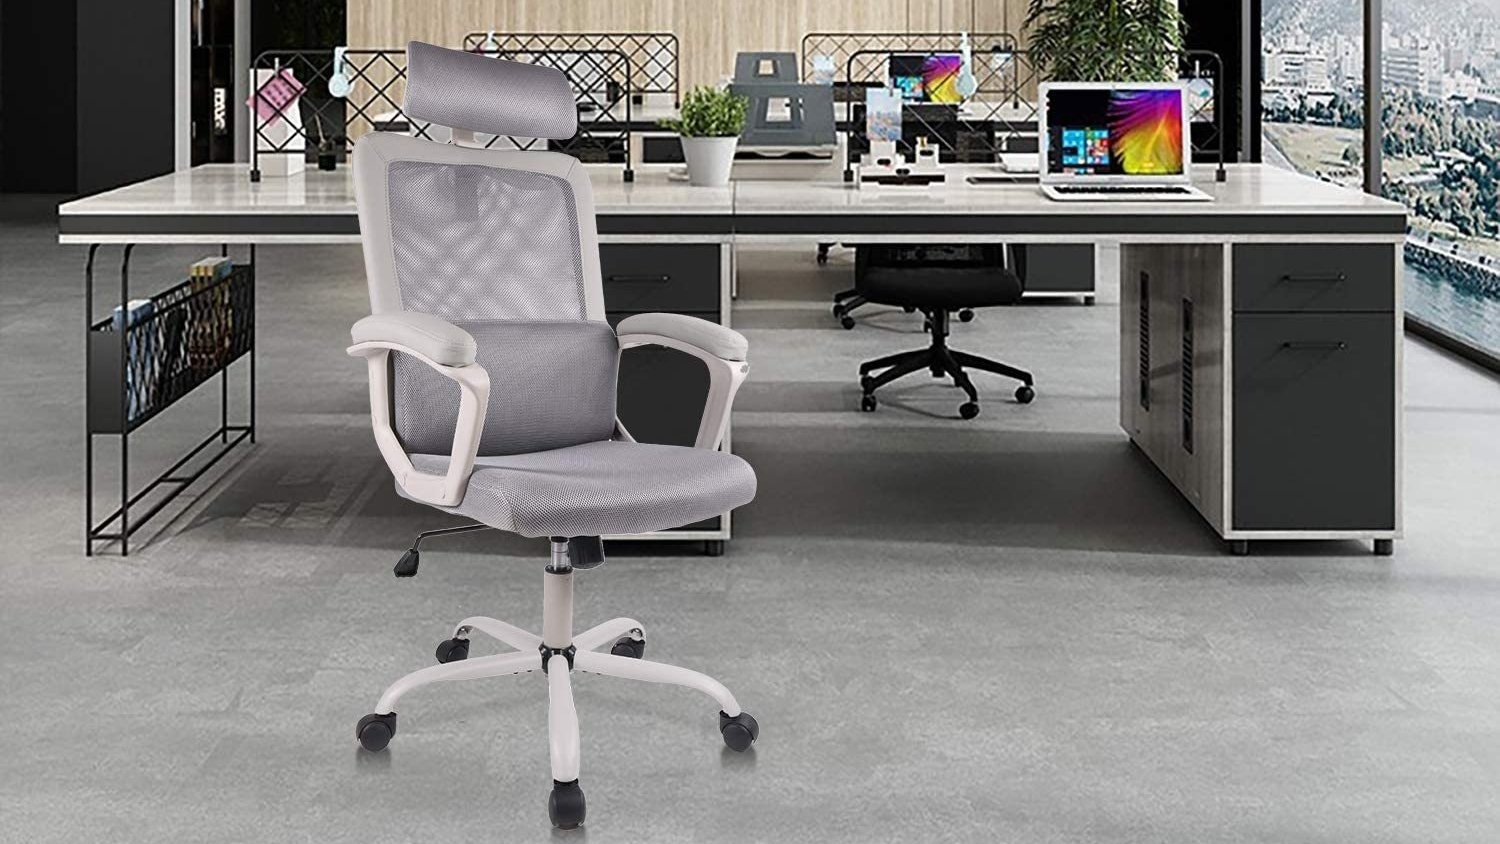 Office Chair Leather Desk Gaming Chair Adjust Seat Height Ergonomic Computer Chair Desk Chair with Lumbar Support for Home Office Vividen Chair Mat Gray